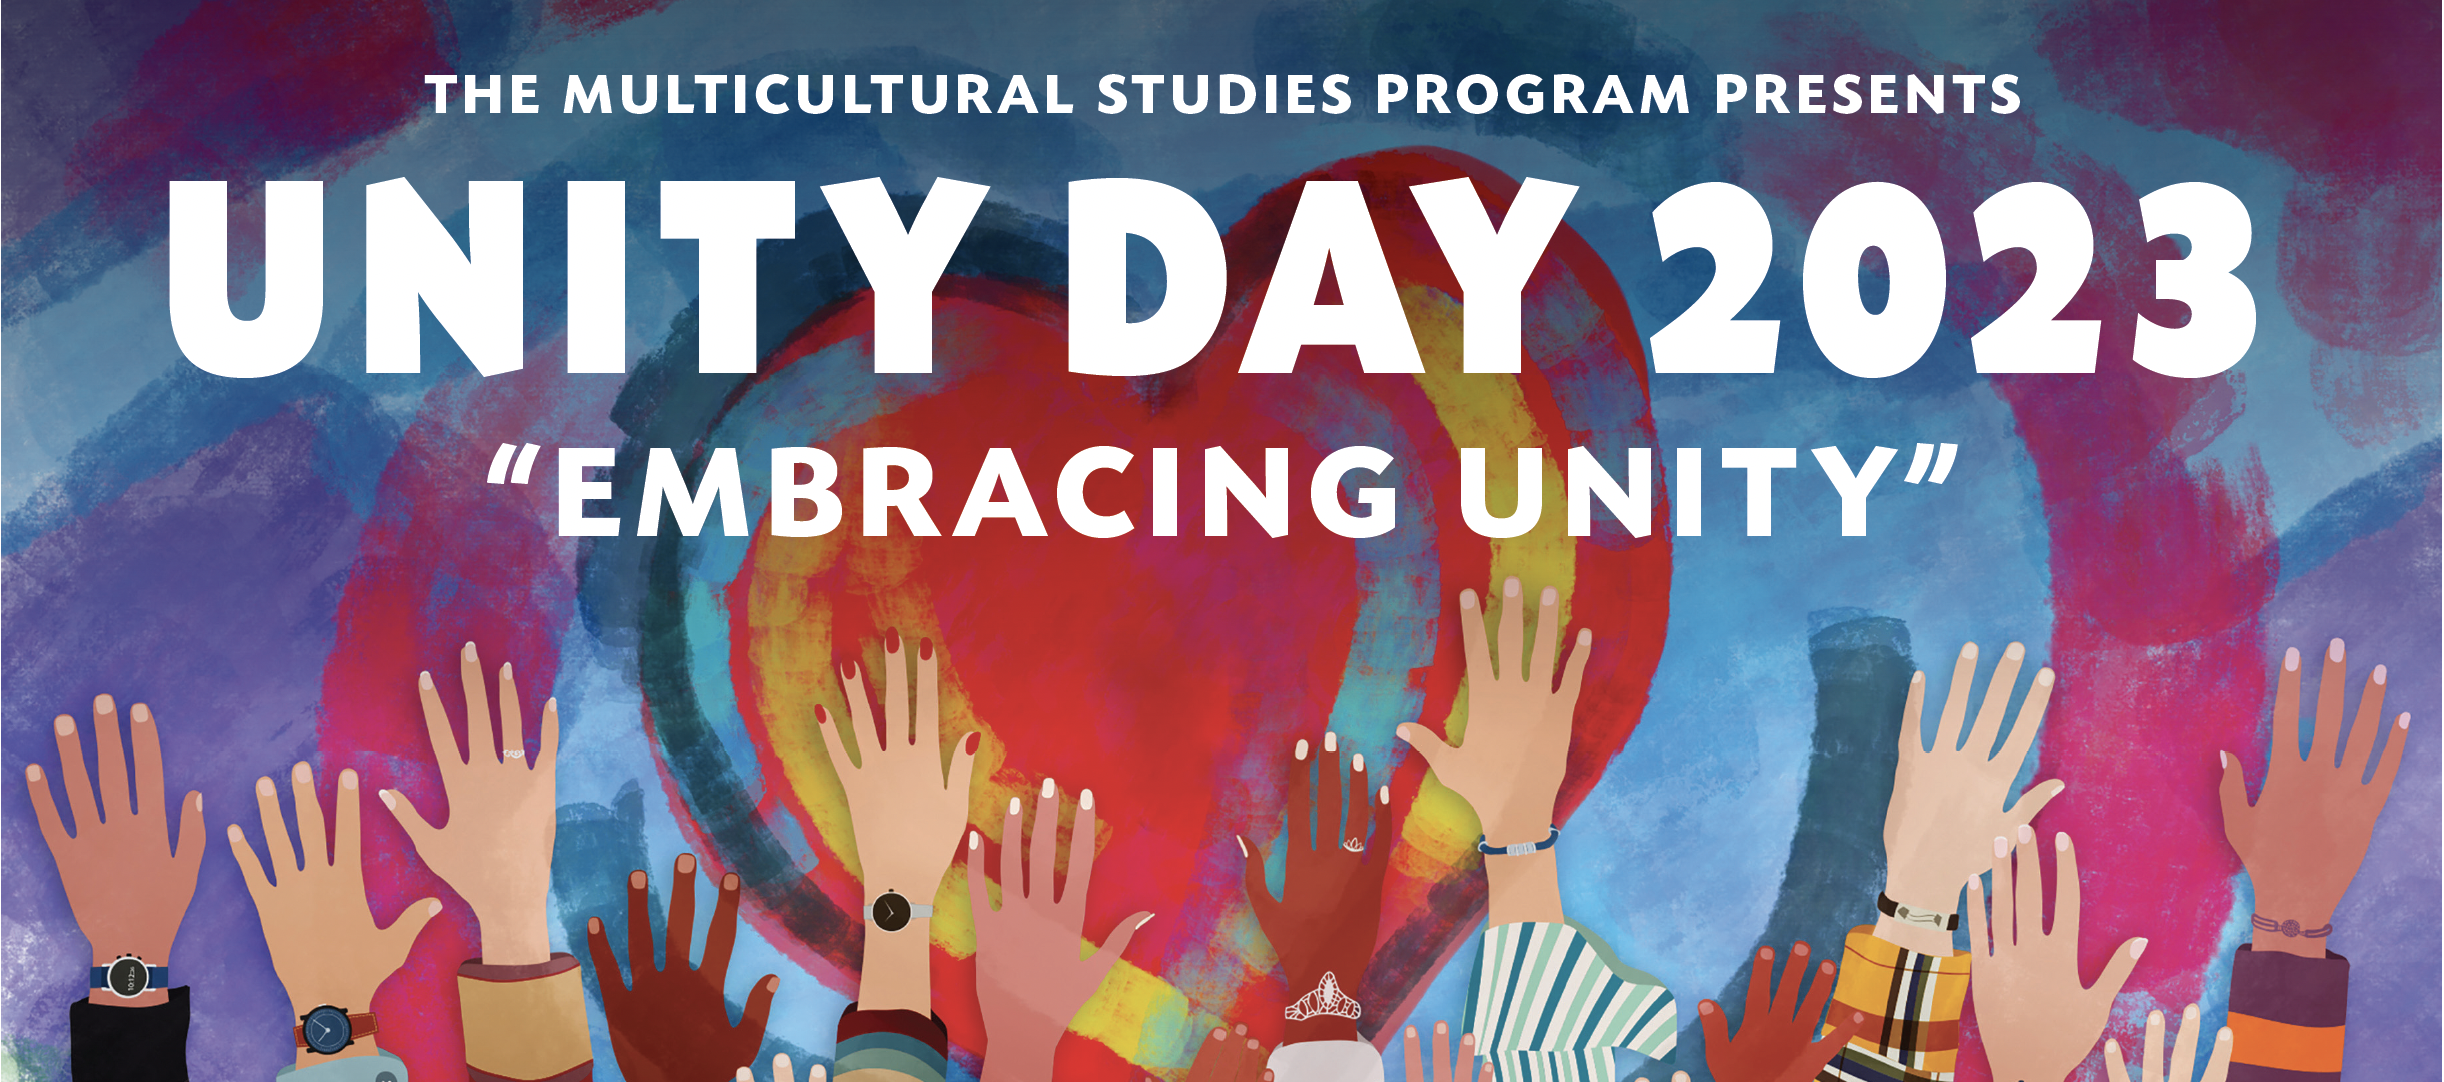 Unity Day 2023 "Embracing Unity" Banner